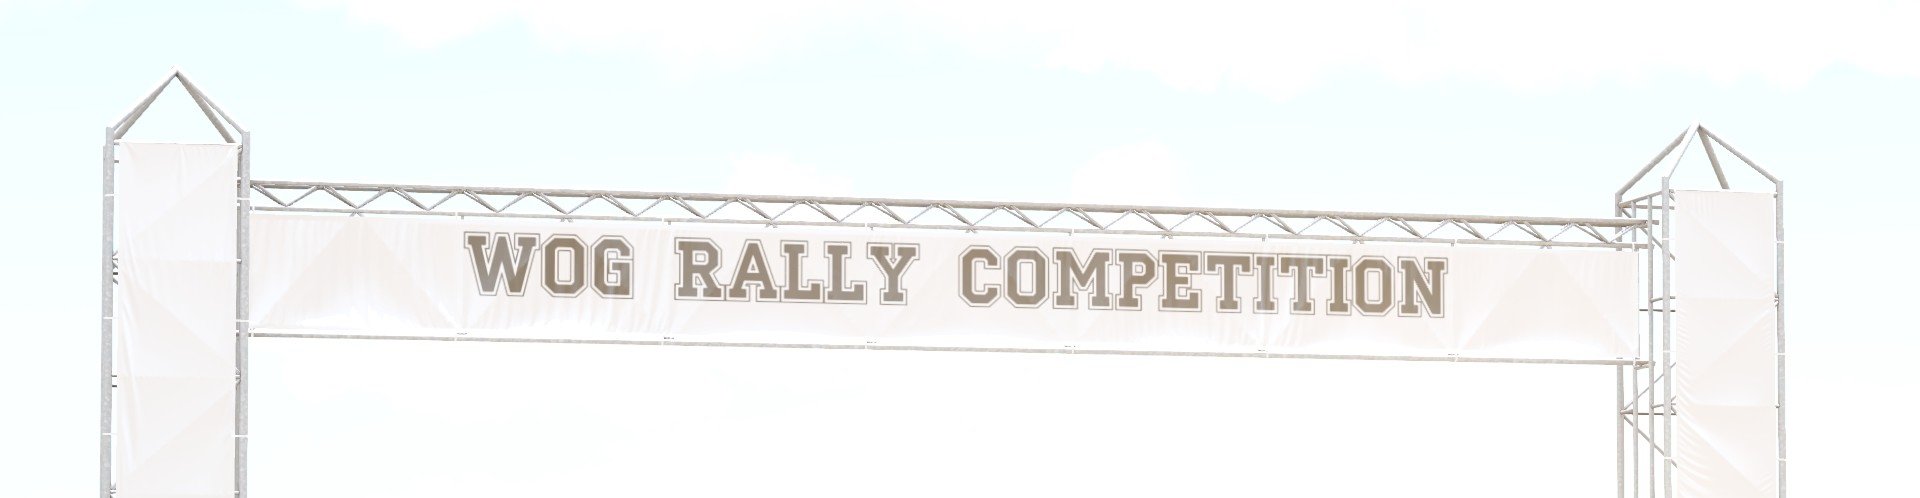 WOG Rally Competition №2